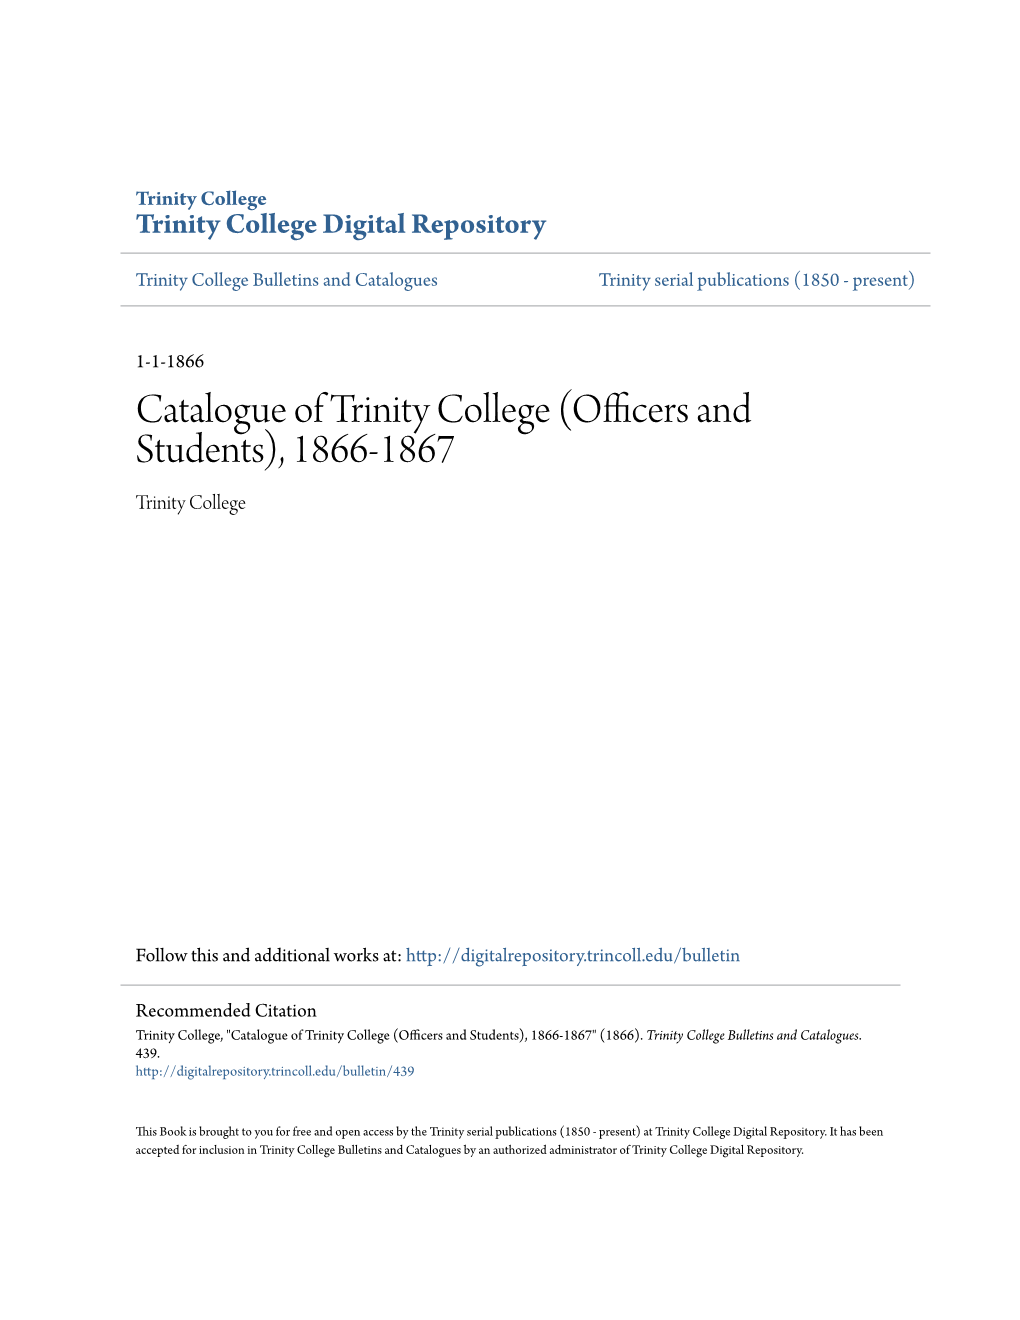 Catalogue of Trinity College (Officers and Students), 1866-1867 Trinity College